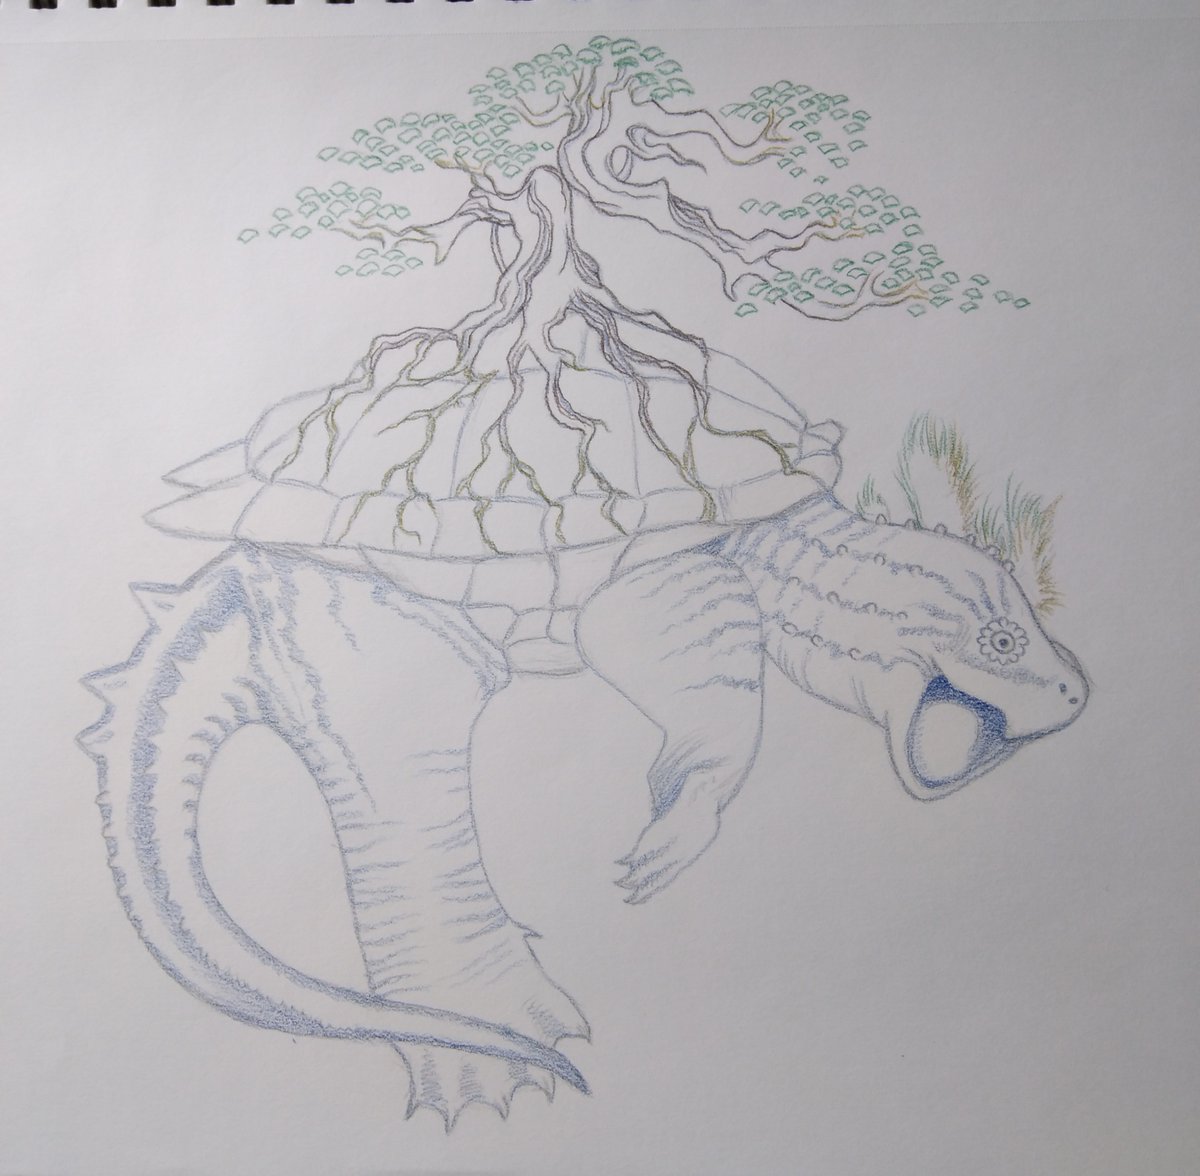 Starting work on shading for this one. #snappingturtle #turtleart #turtledrawing #bonsaitree #bonsaiart #colorpencilart #colorpencildrawing #colorpencilsketch #prismacolorpencils #prismacolor